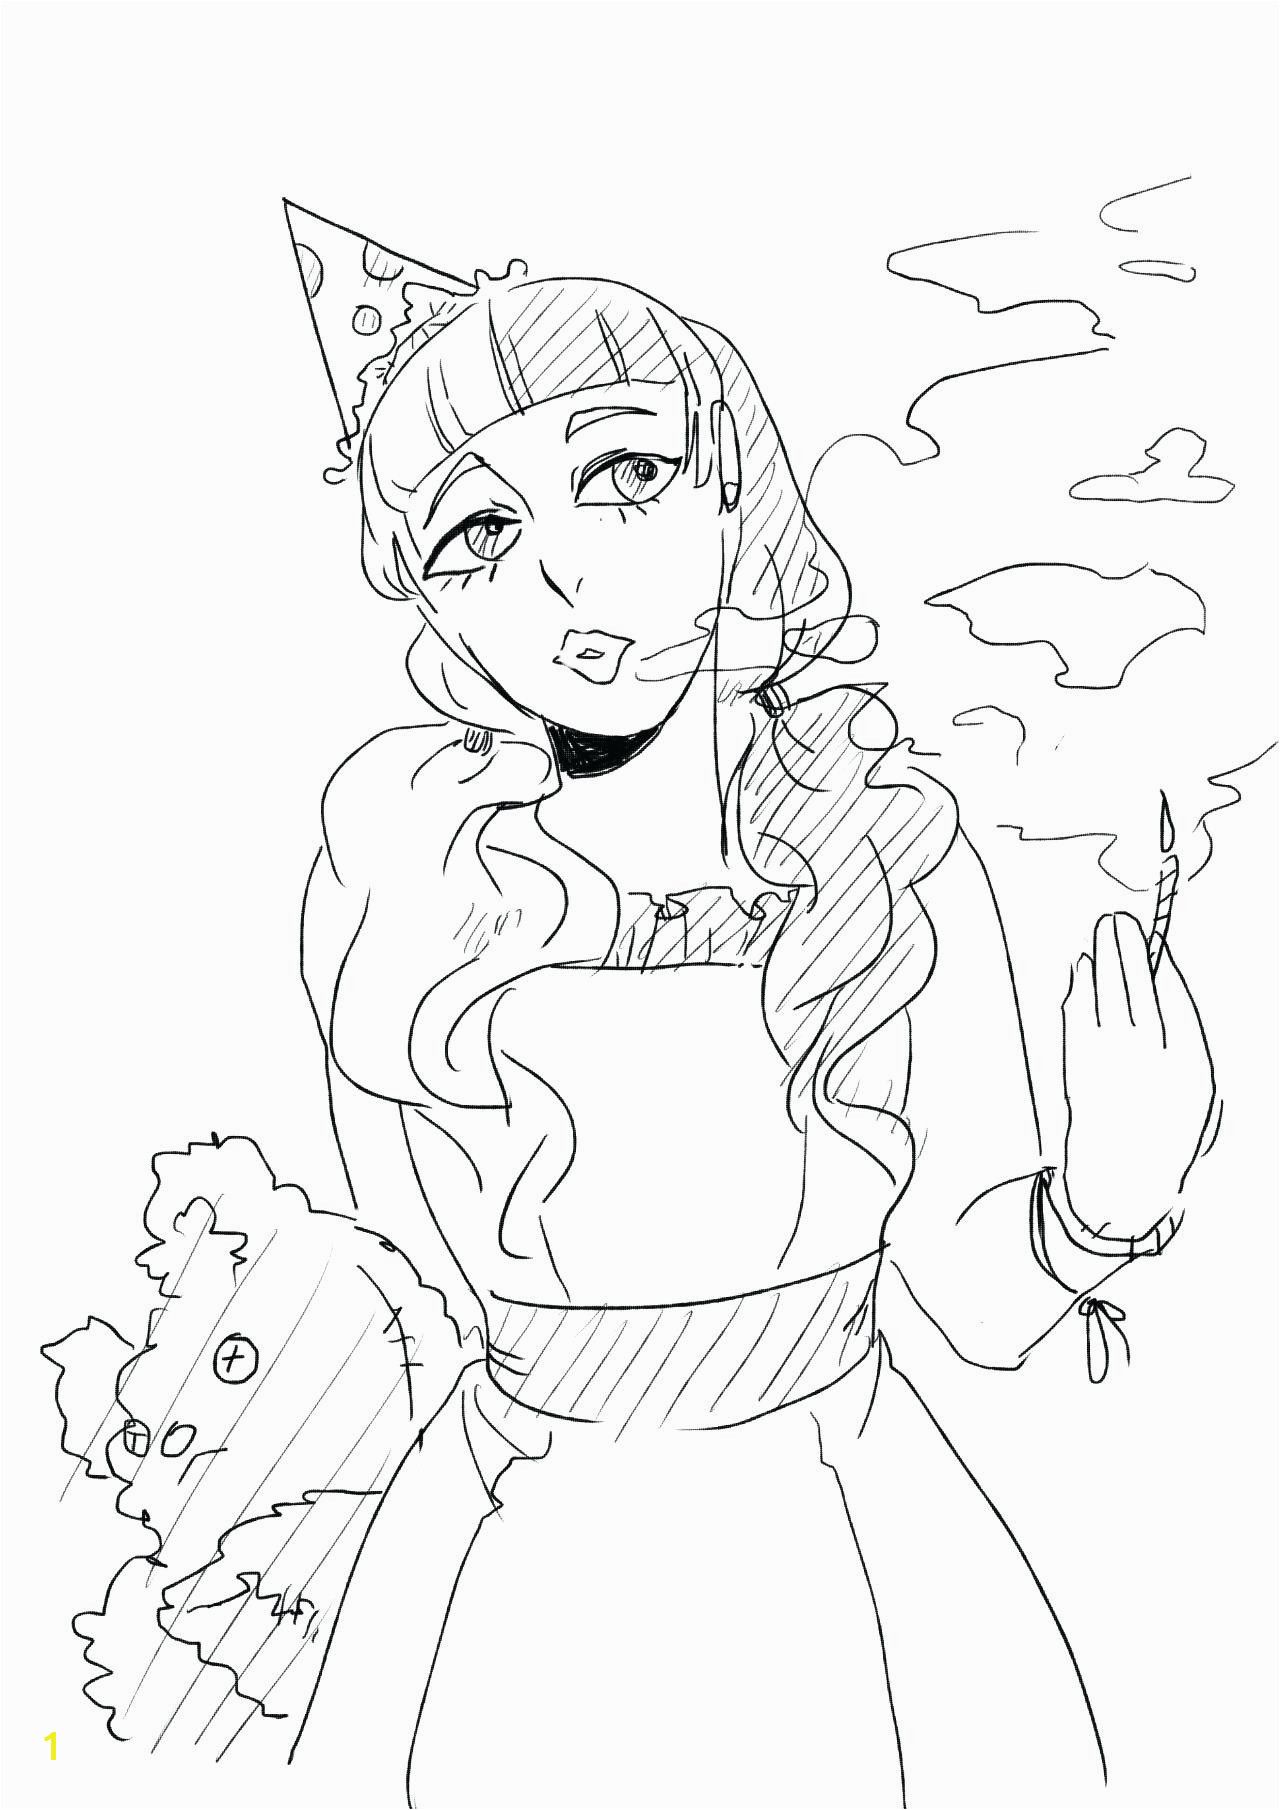 Cry Baby coloring page melanie martinez - Google Search | Melanie martinez  coloring book, Baby coloring pages, Cry baby coloring book